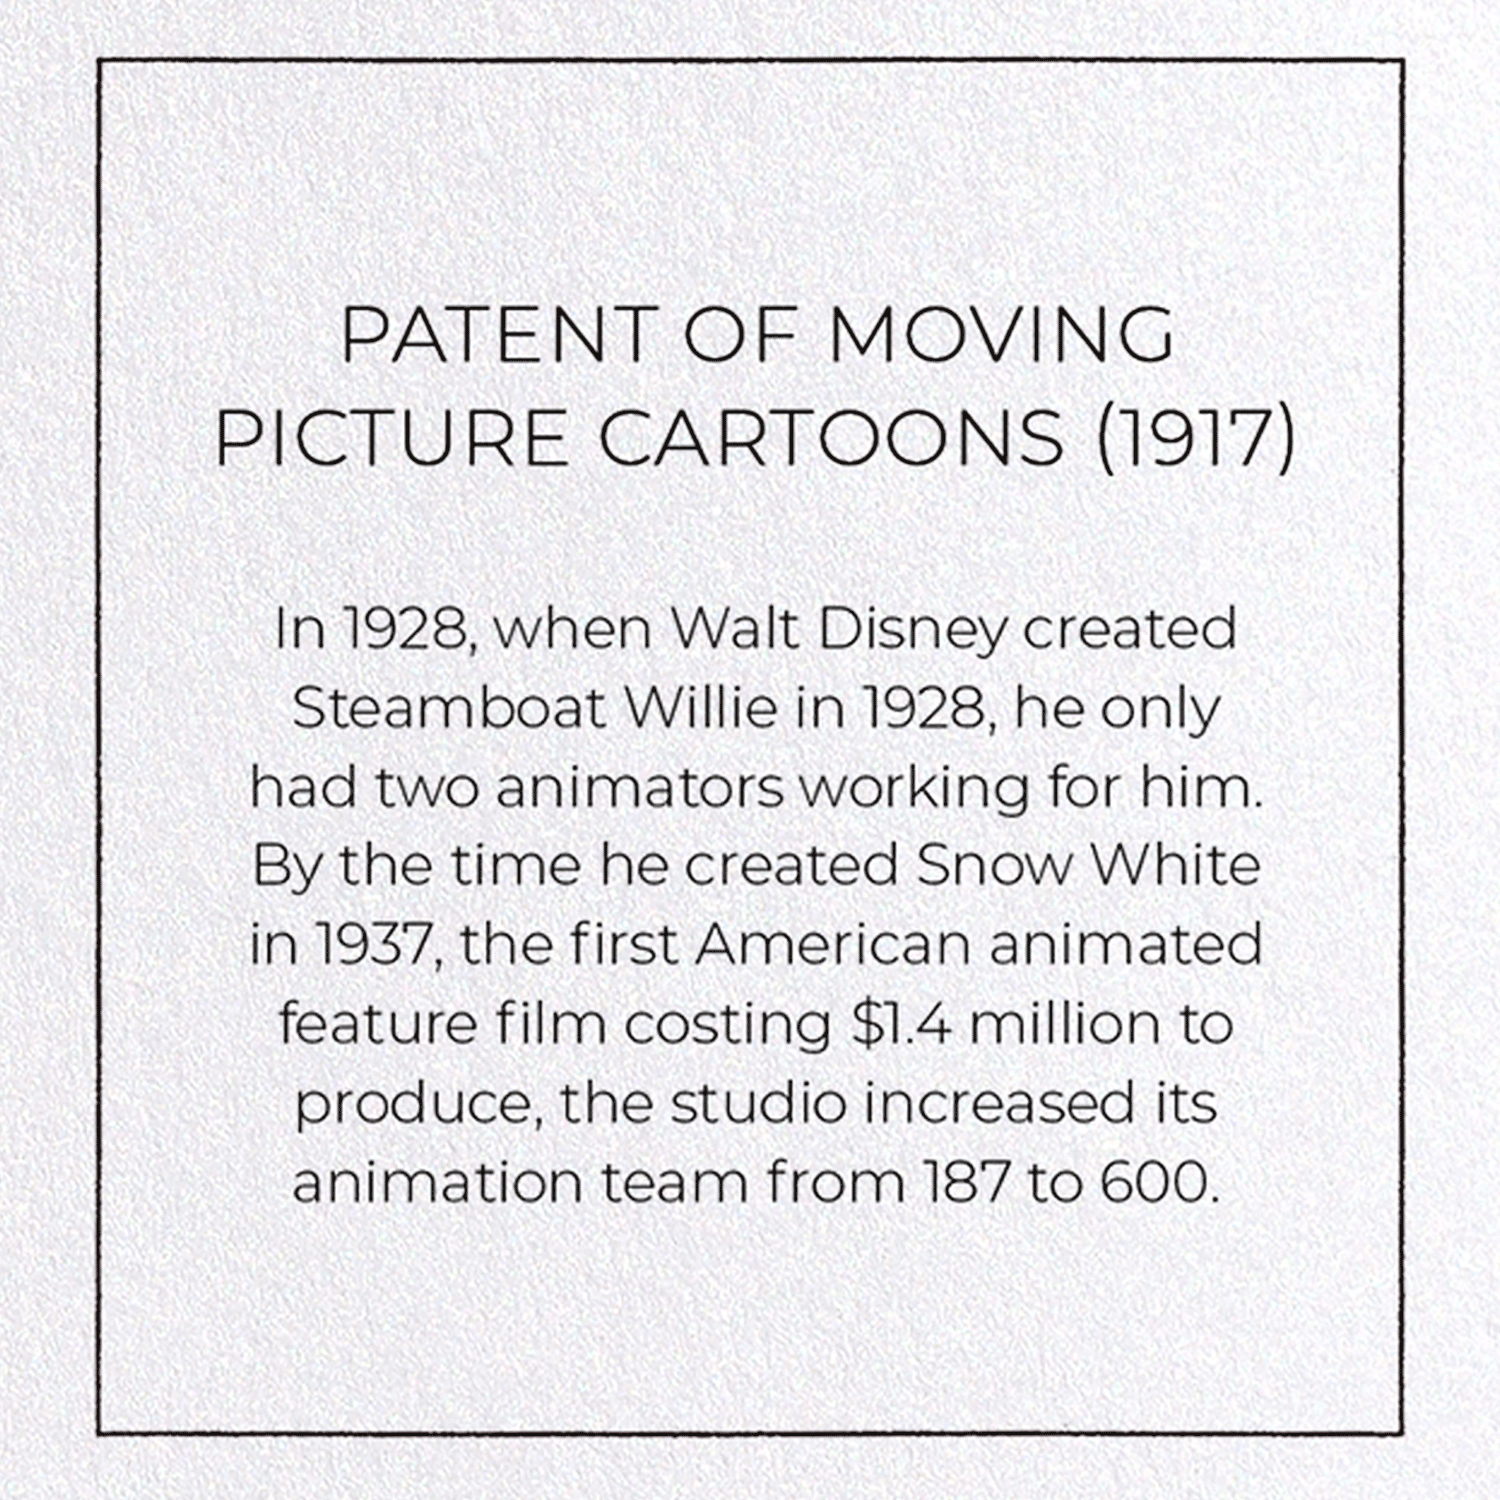 PATENT OF MOVING PICTURE CARTOONS (1917)